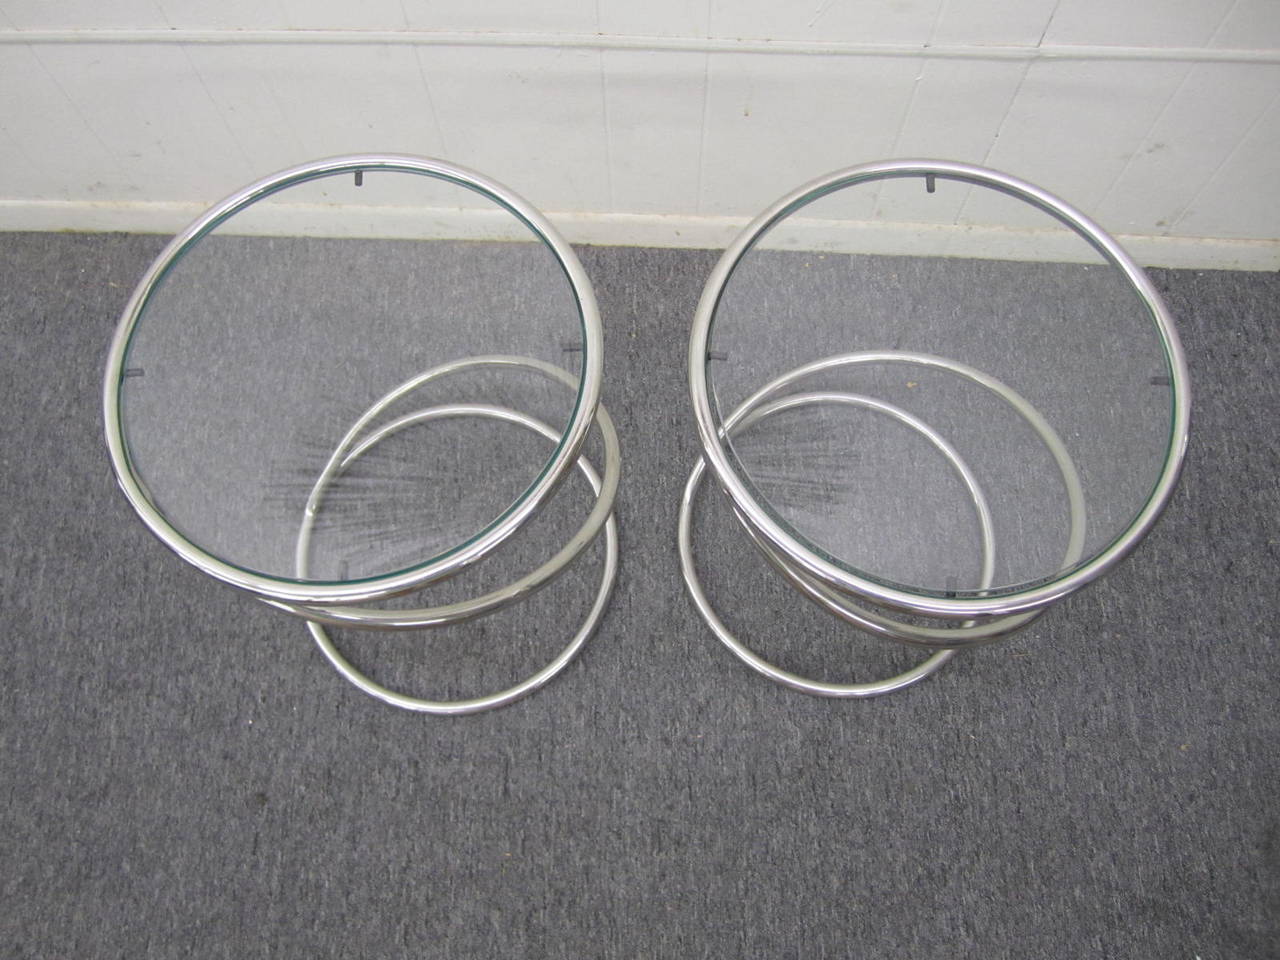 Sculptural pair of 1970s Pace Collection chrome spring tables. This pair of polished chrome and glass tables are called the 